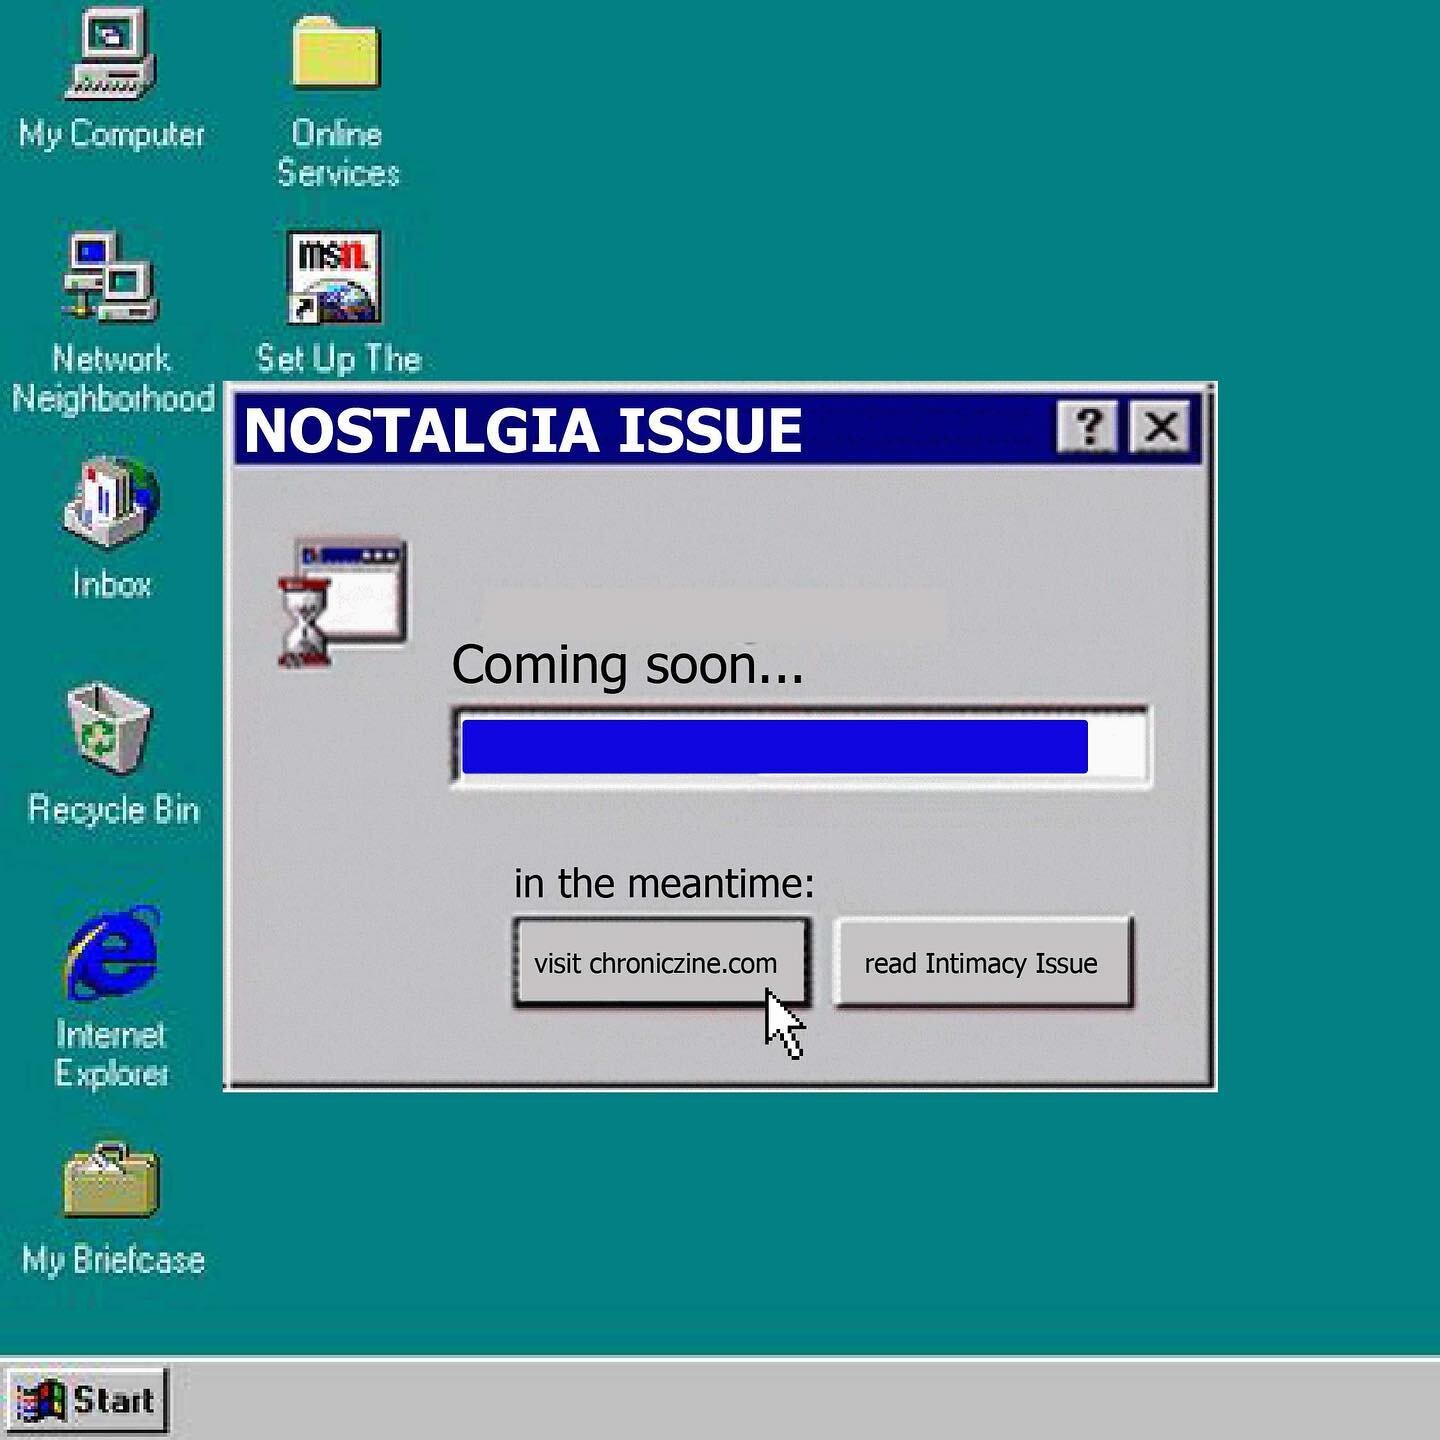 Our second edition, the Nostalgia Issue, is coming soon! We&rsquo;re doubling the amount of content in this edition, and are working super hard to make sure we nail every detail. Thank you all for keeping up with Chronic, we can&rsquo;t wait to share